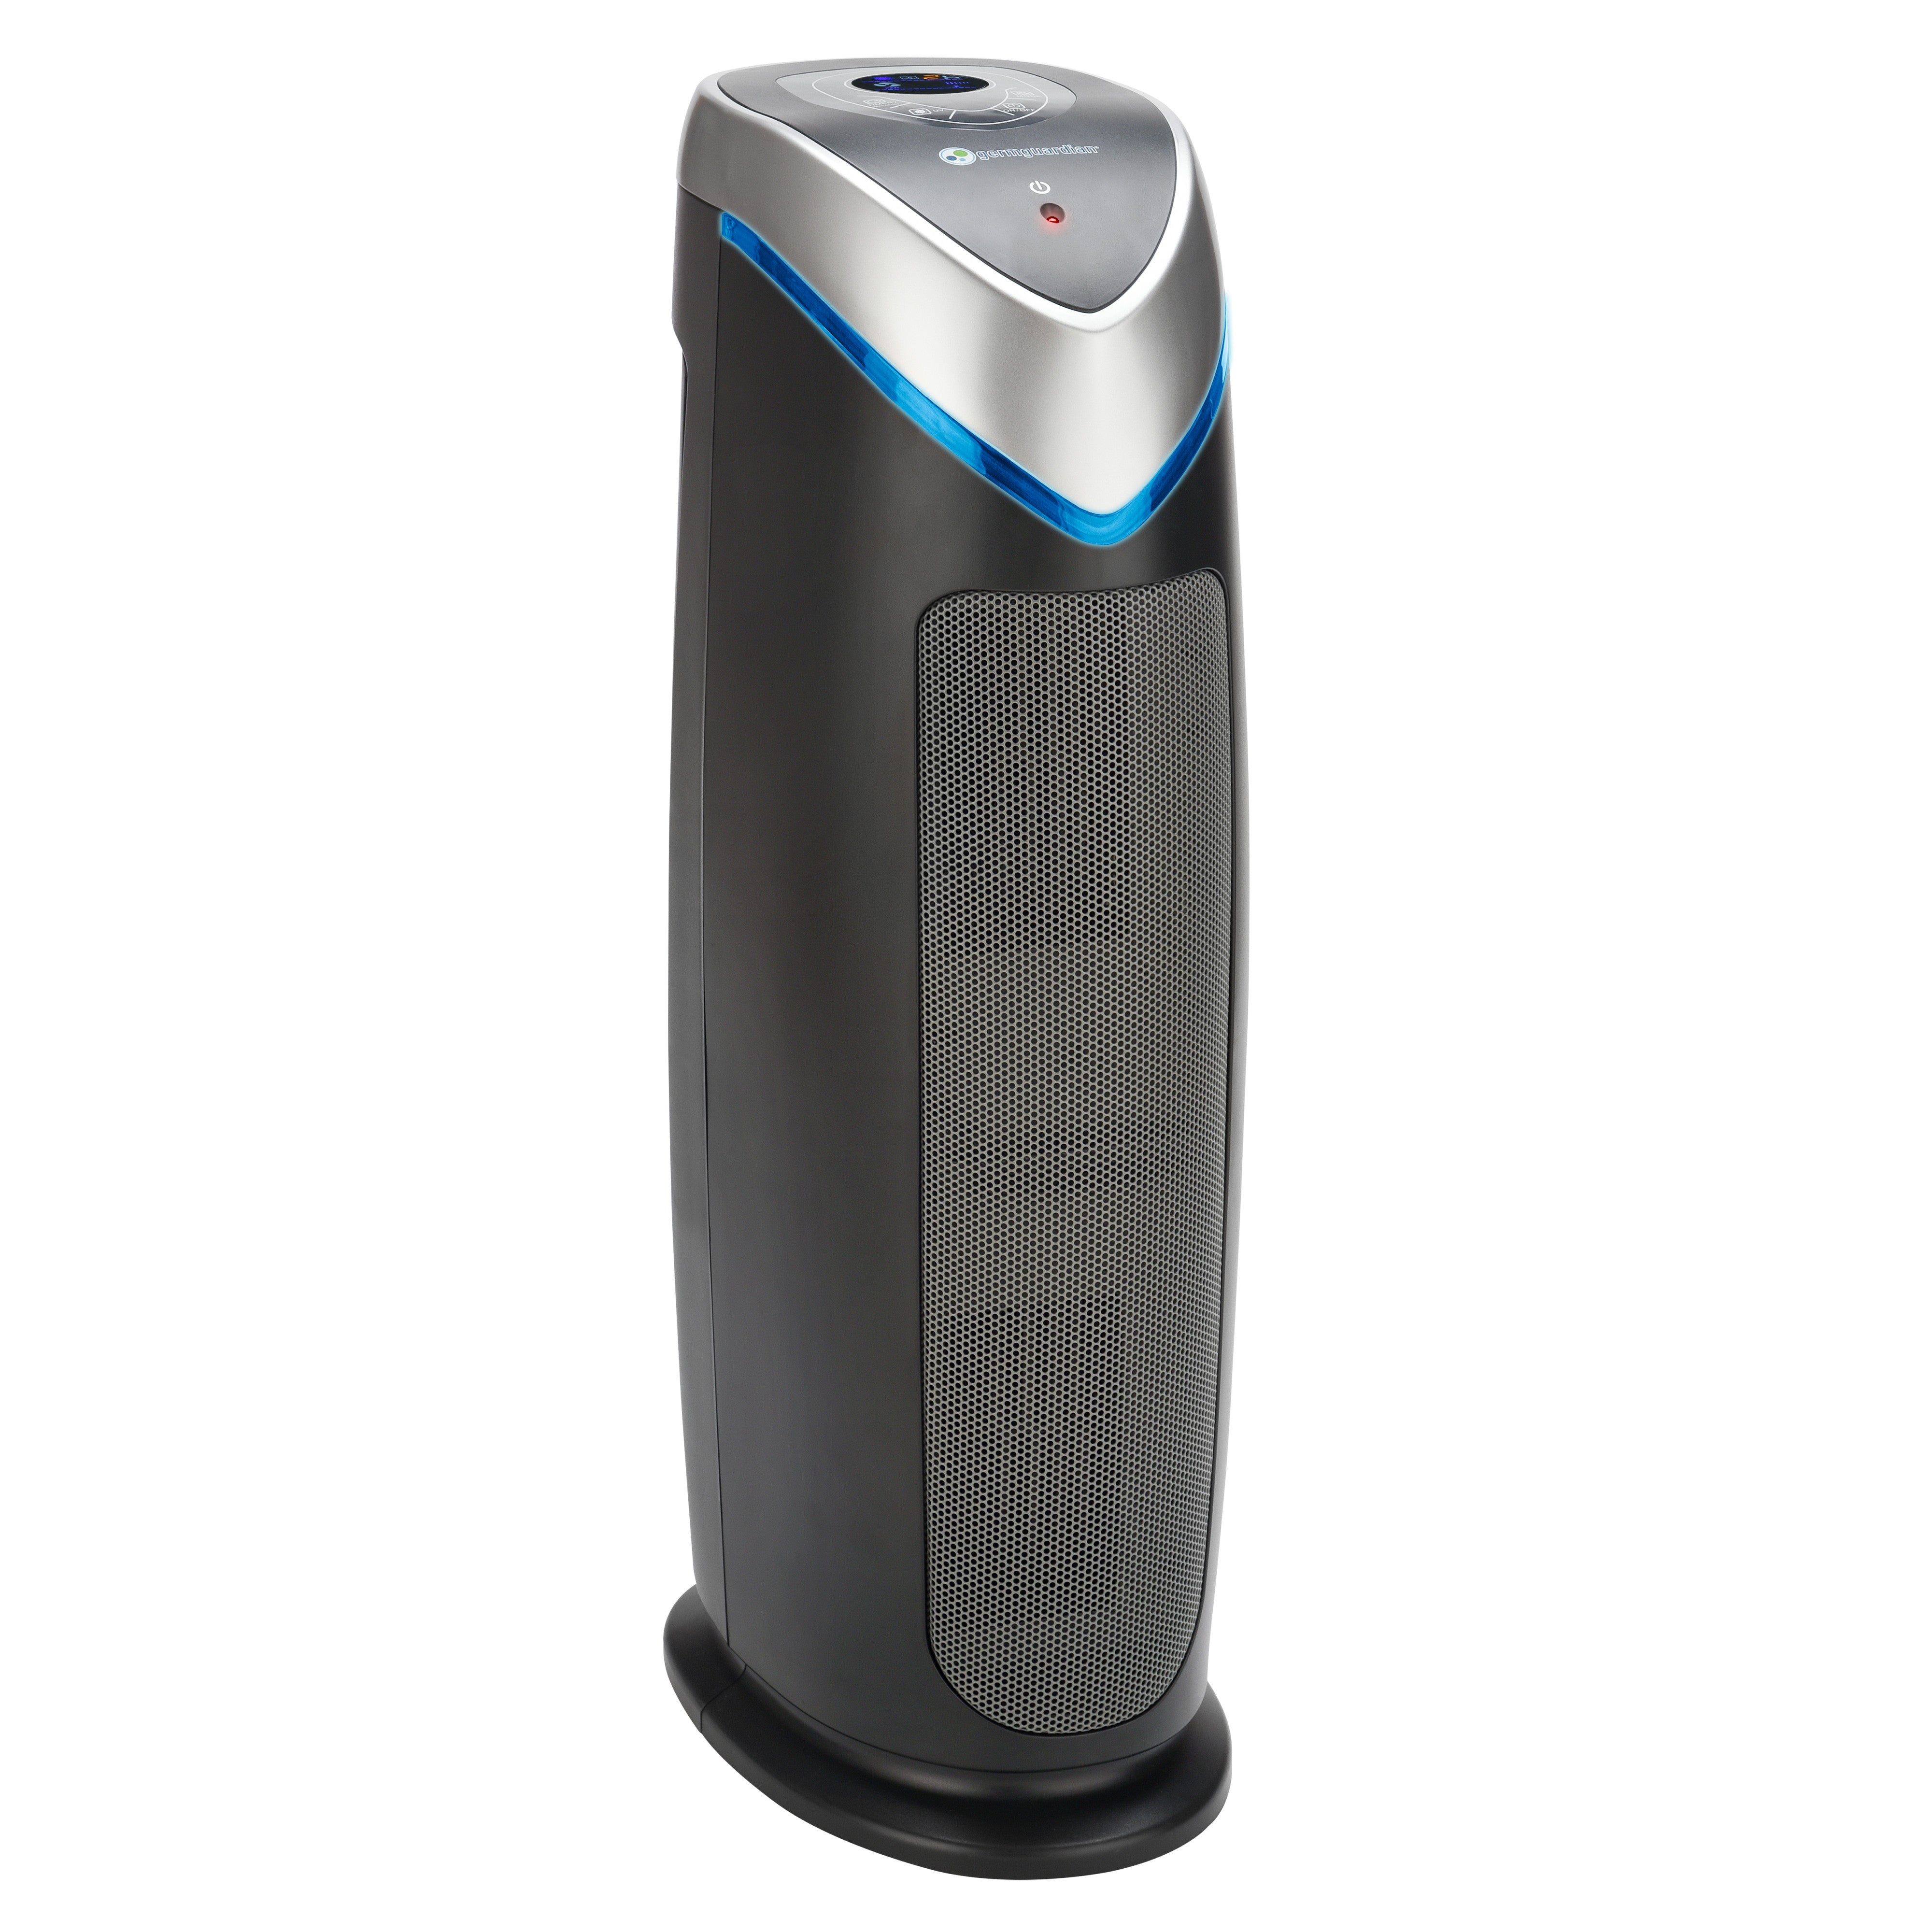 GermGuardian AC4870 4-in-1 Digital Air Purifier with HEPA Filter, UV-C Sanitizer and Odor Reduction, 22-Inch Tower